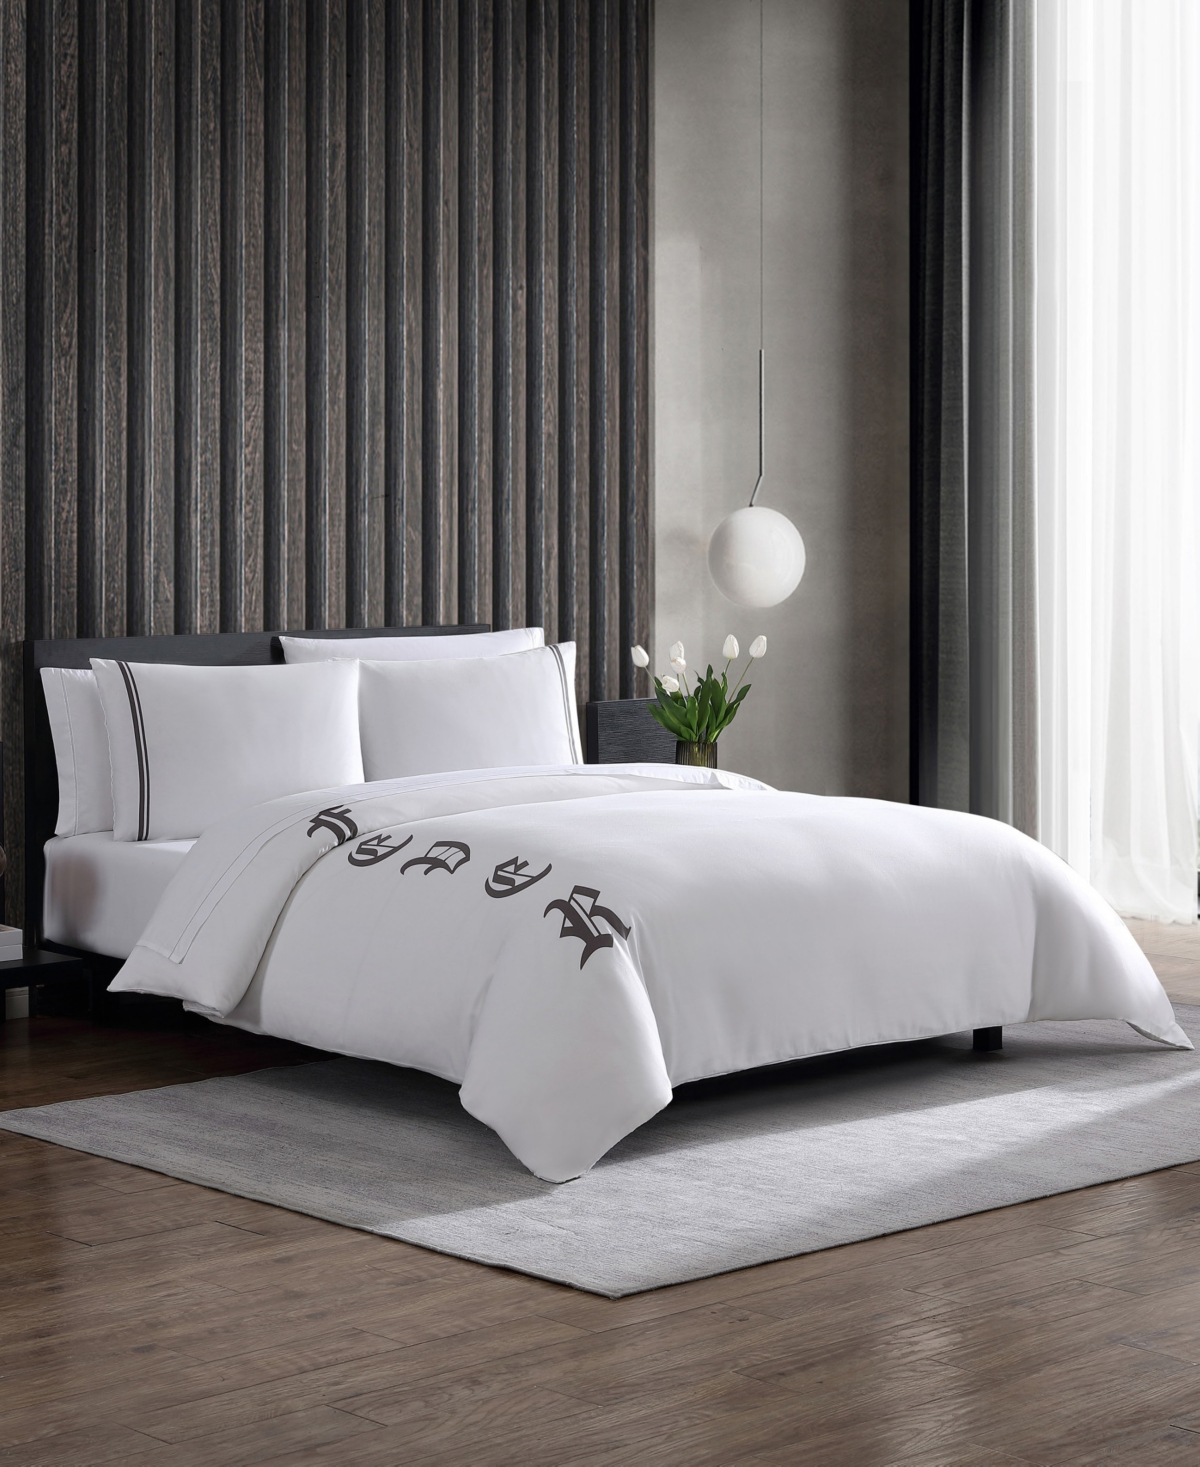 Vera Wang Closeout!  3 Piece Forever Duvet Cover Set, Queen Bedding In White